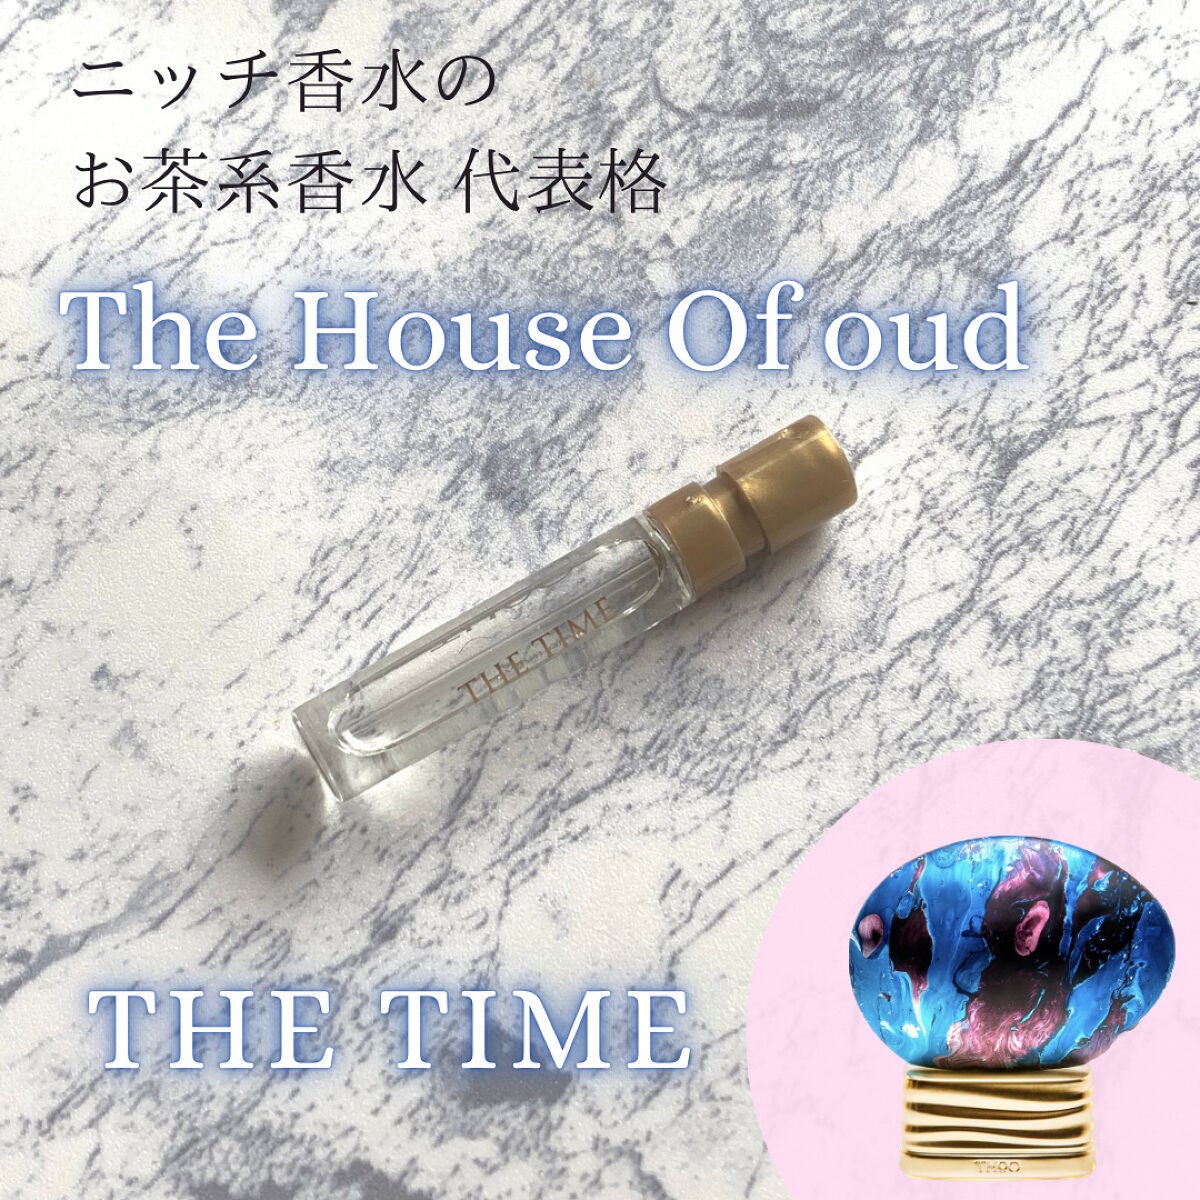 the house of oud tho0 the timeザダイム香水